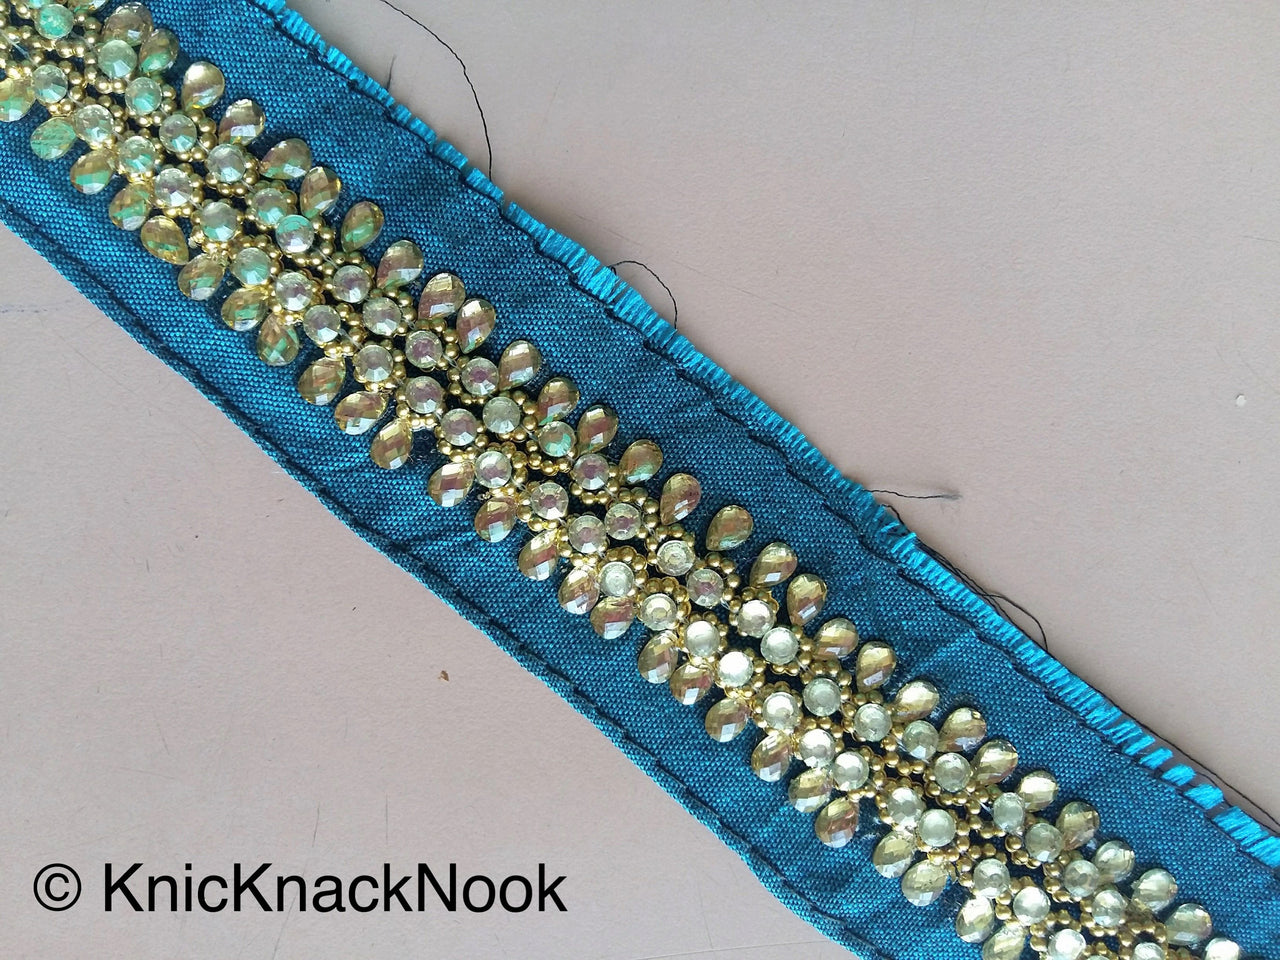 Purple / Blue / Brown Fabric Trim With Silver And Gold Kundan Beads Work, Approx. 36mm Wide - 200317L526/27/28